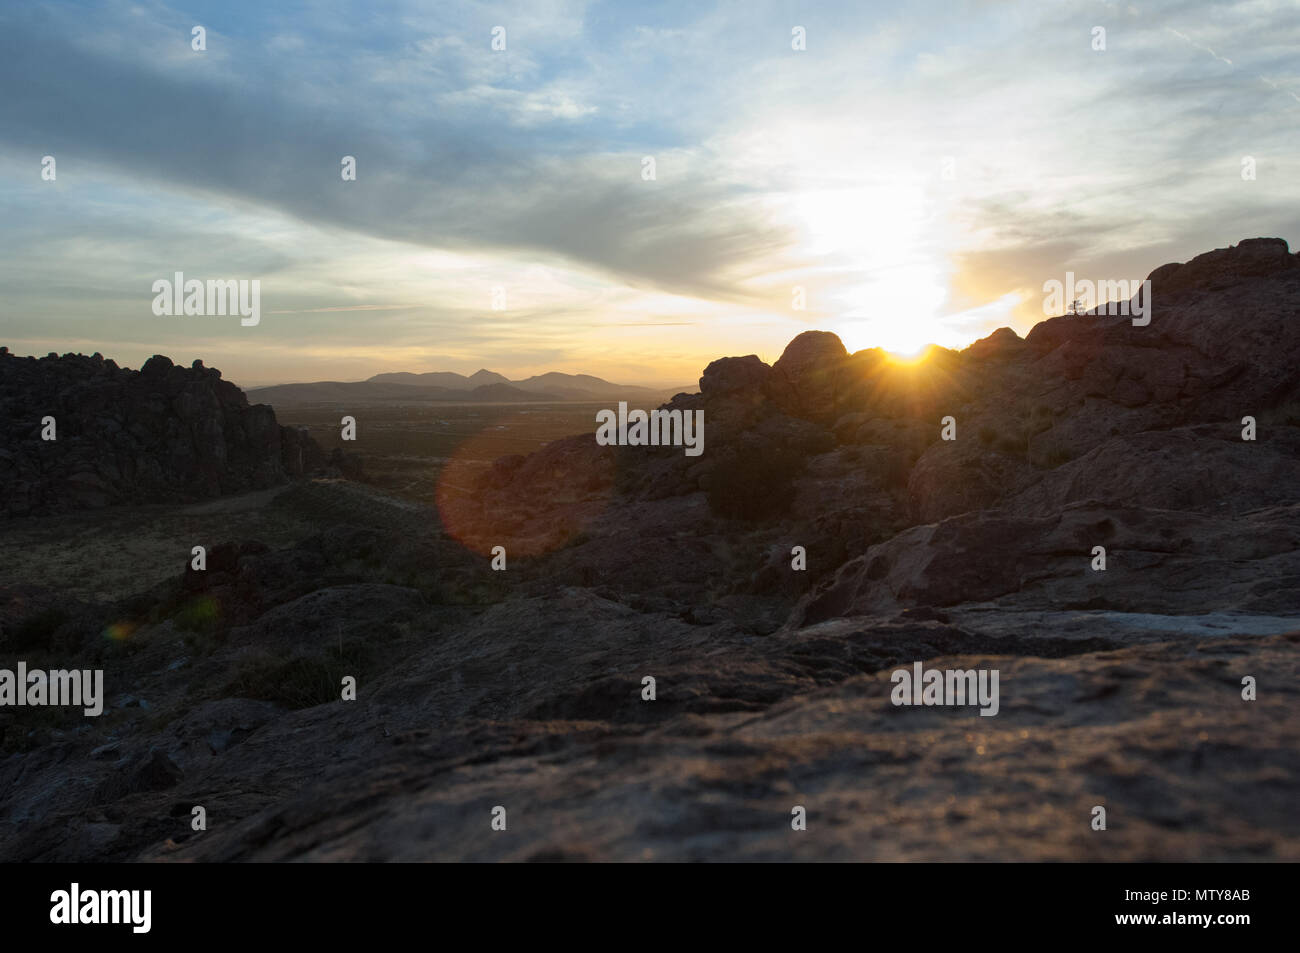 Scenic landscape view at Hueco Tanks State Park in El Paso, Texas during sunset. Stock Photo